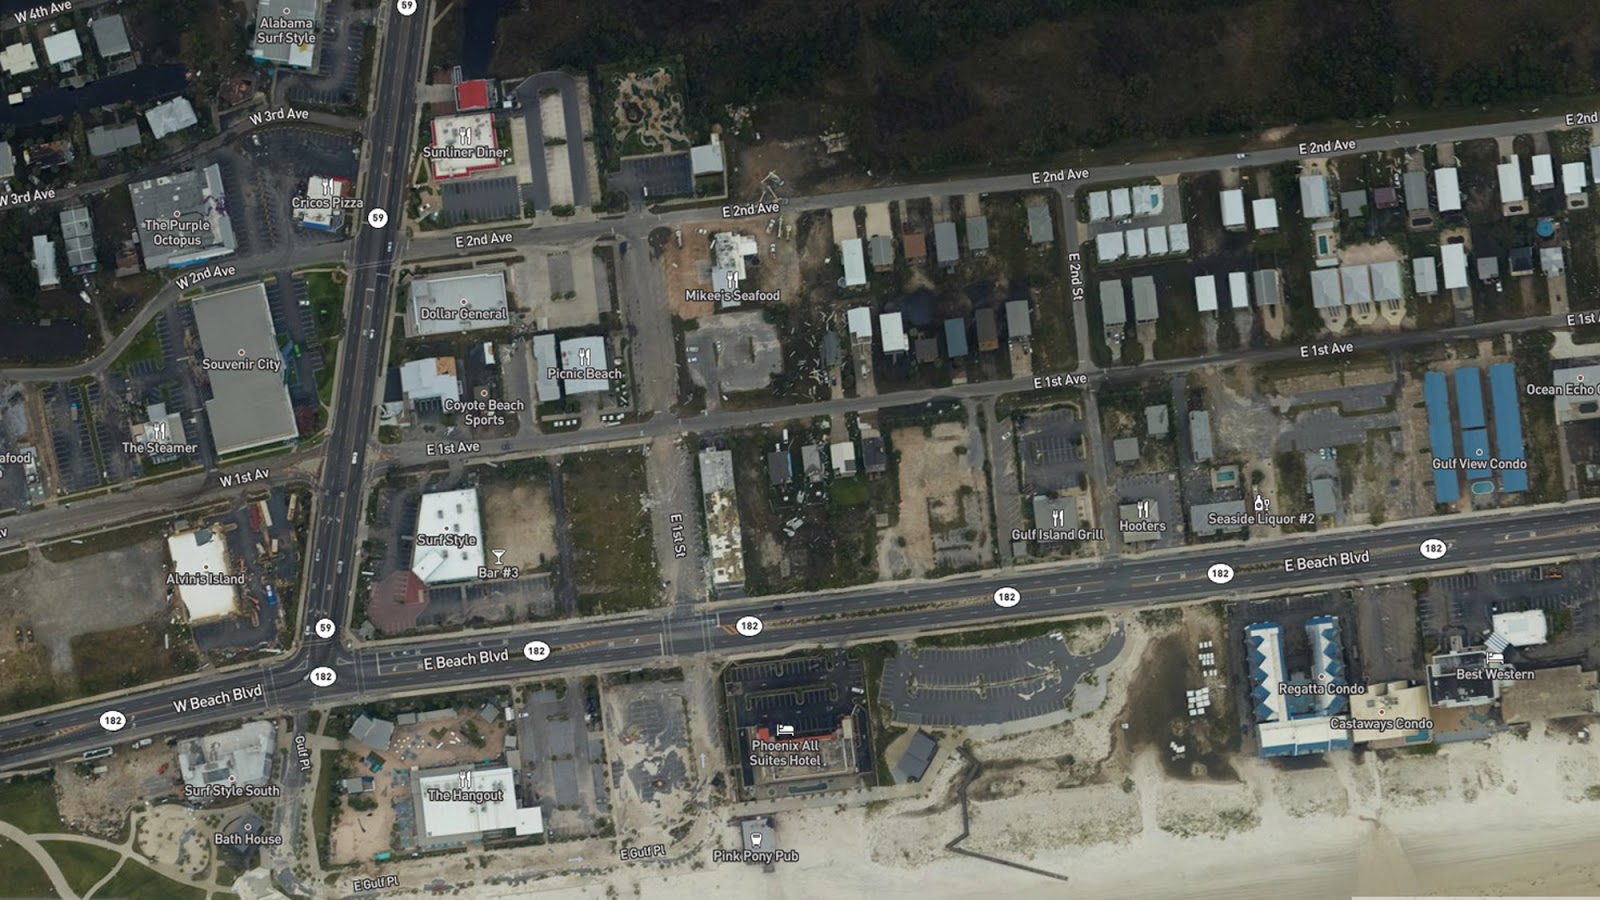 an image showing Area west of Shelby Lake, Gulf Shores, Alabama (near SR-182) after Sally